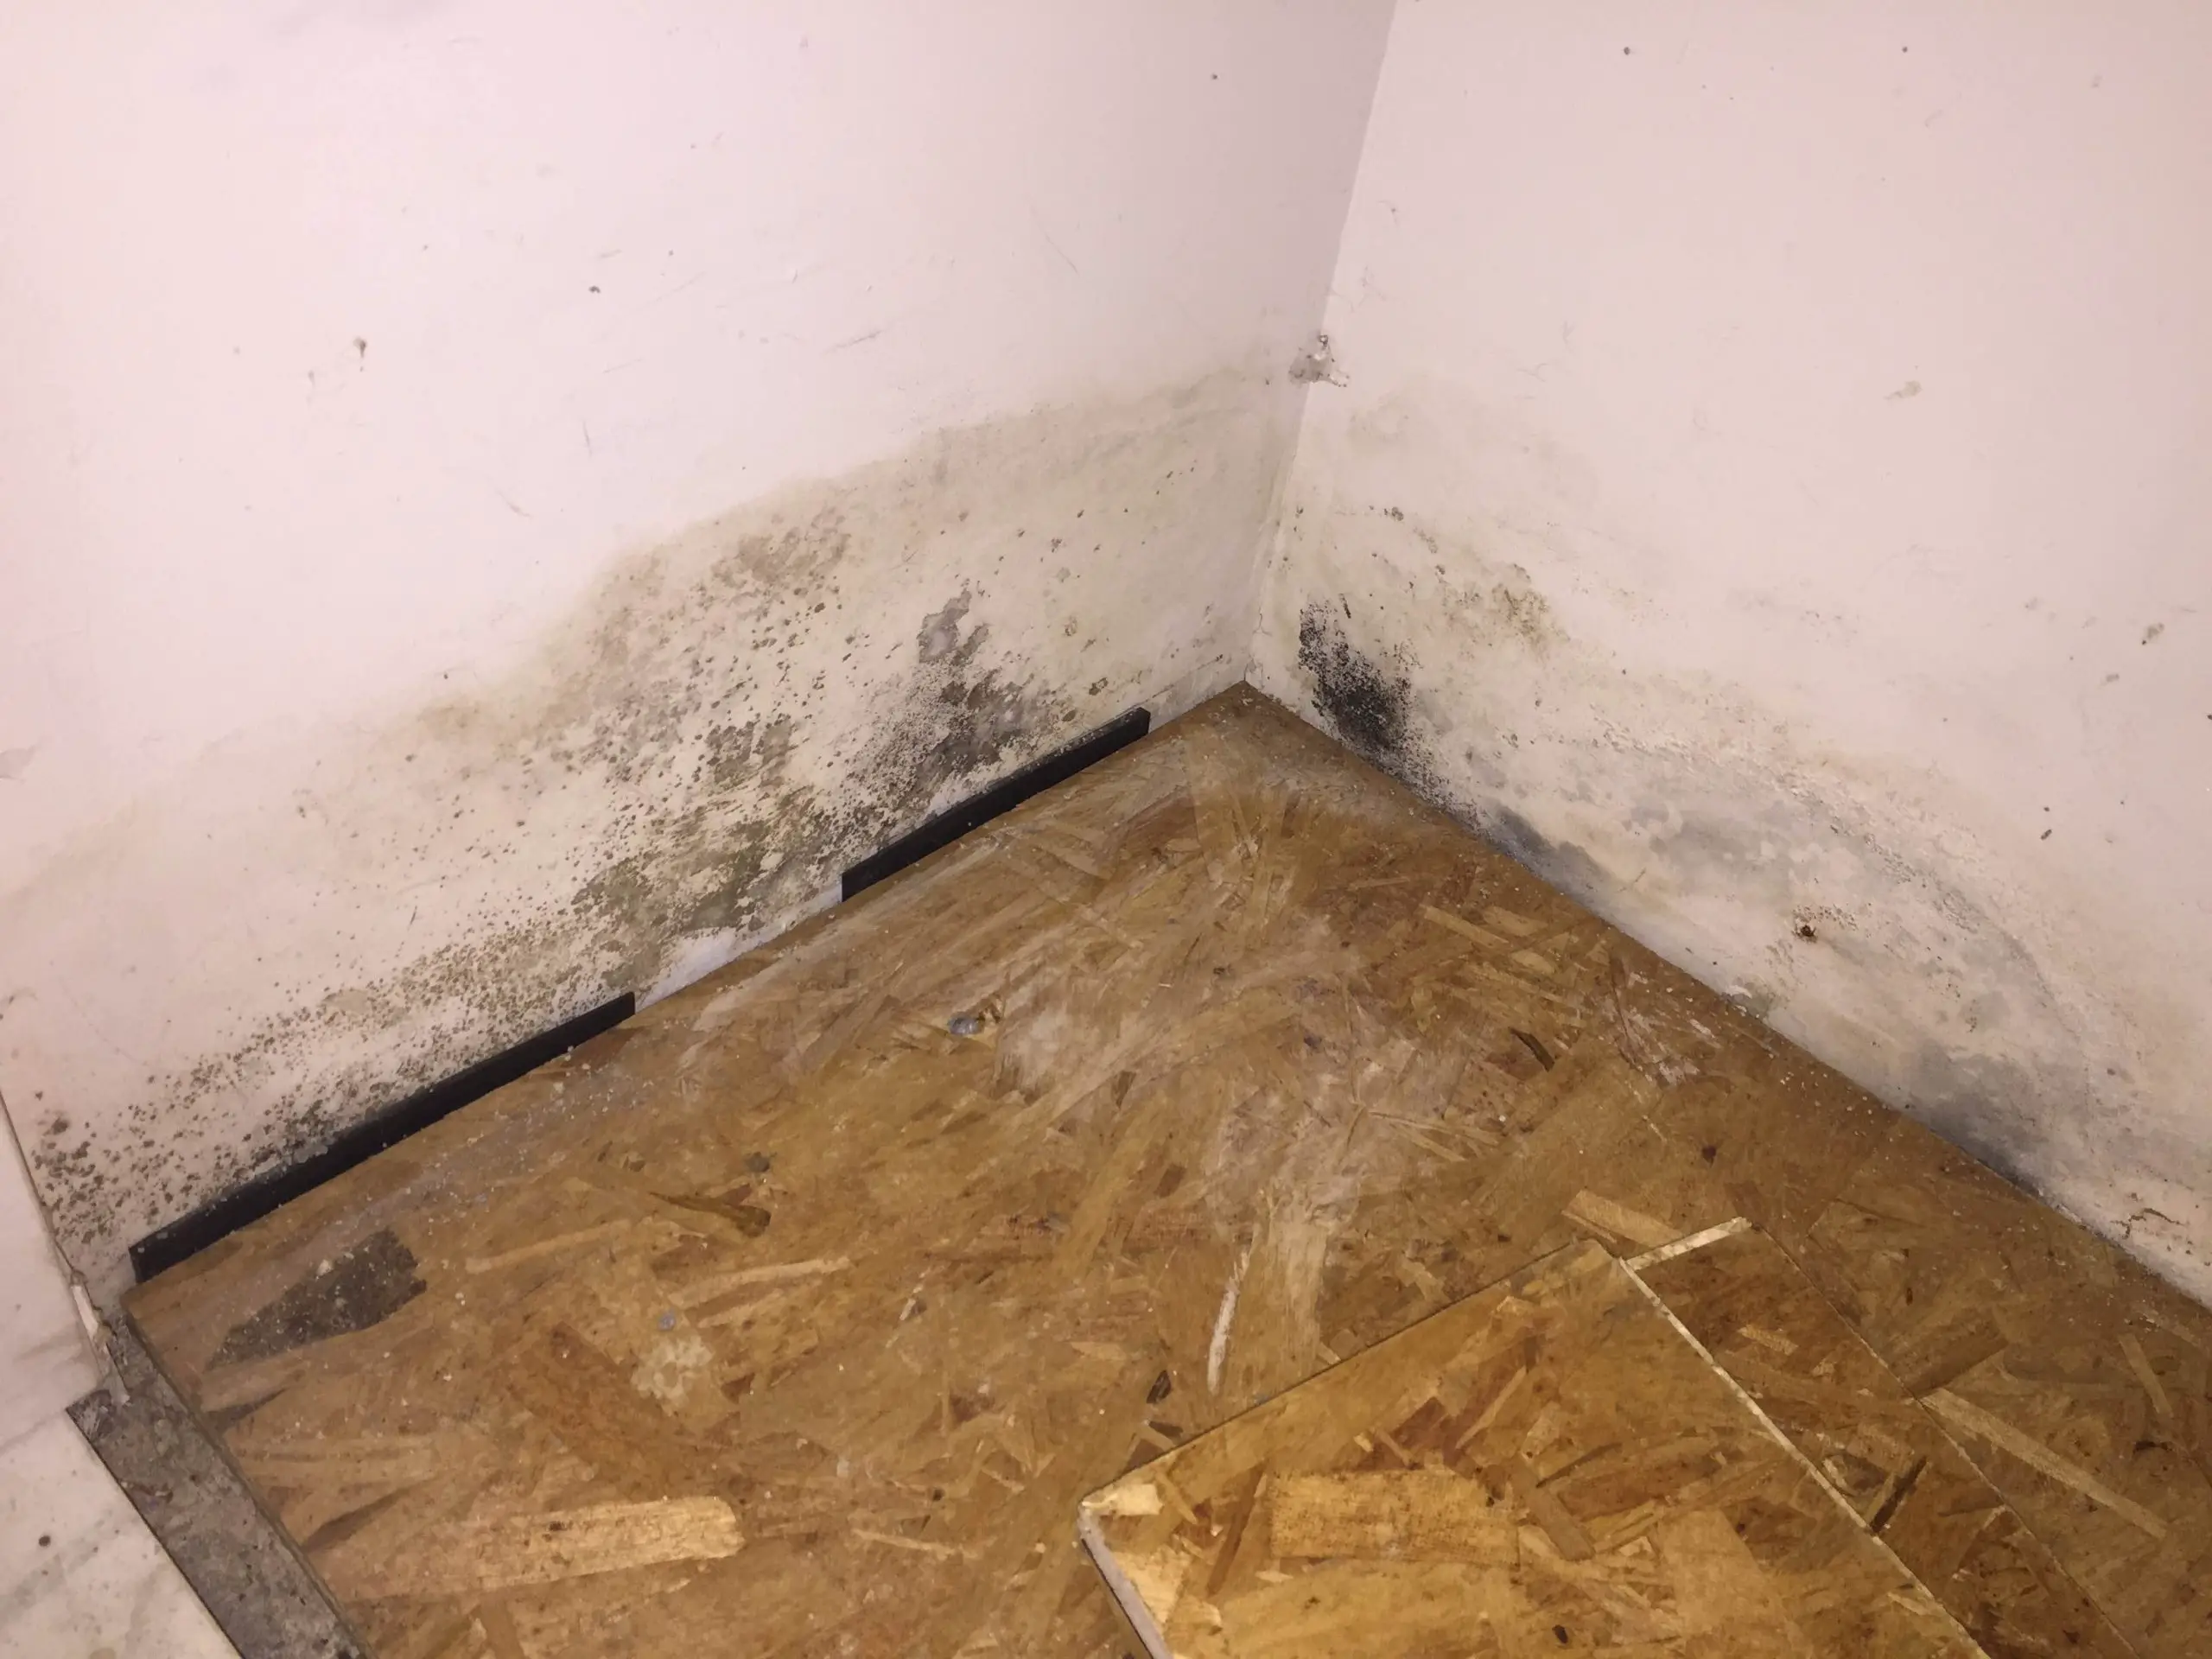 WA Buying a home. Found potentially mold. Need advice ...